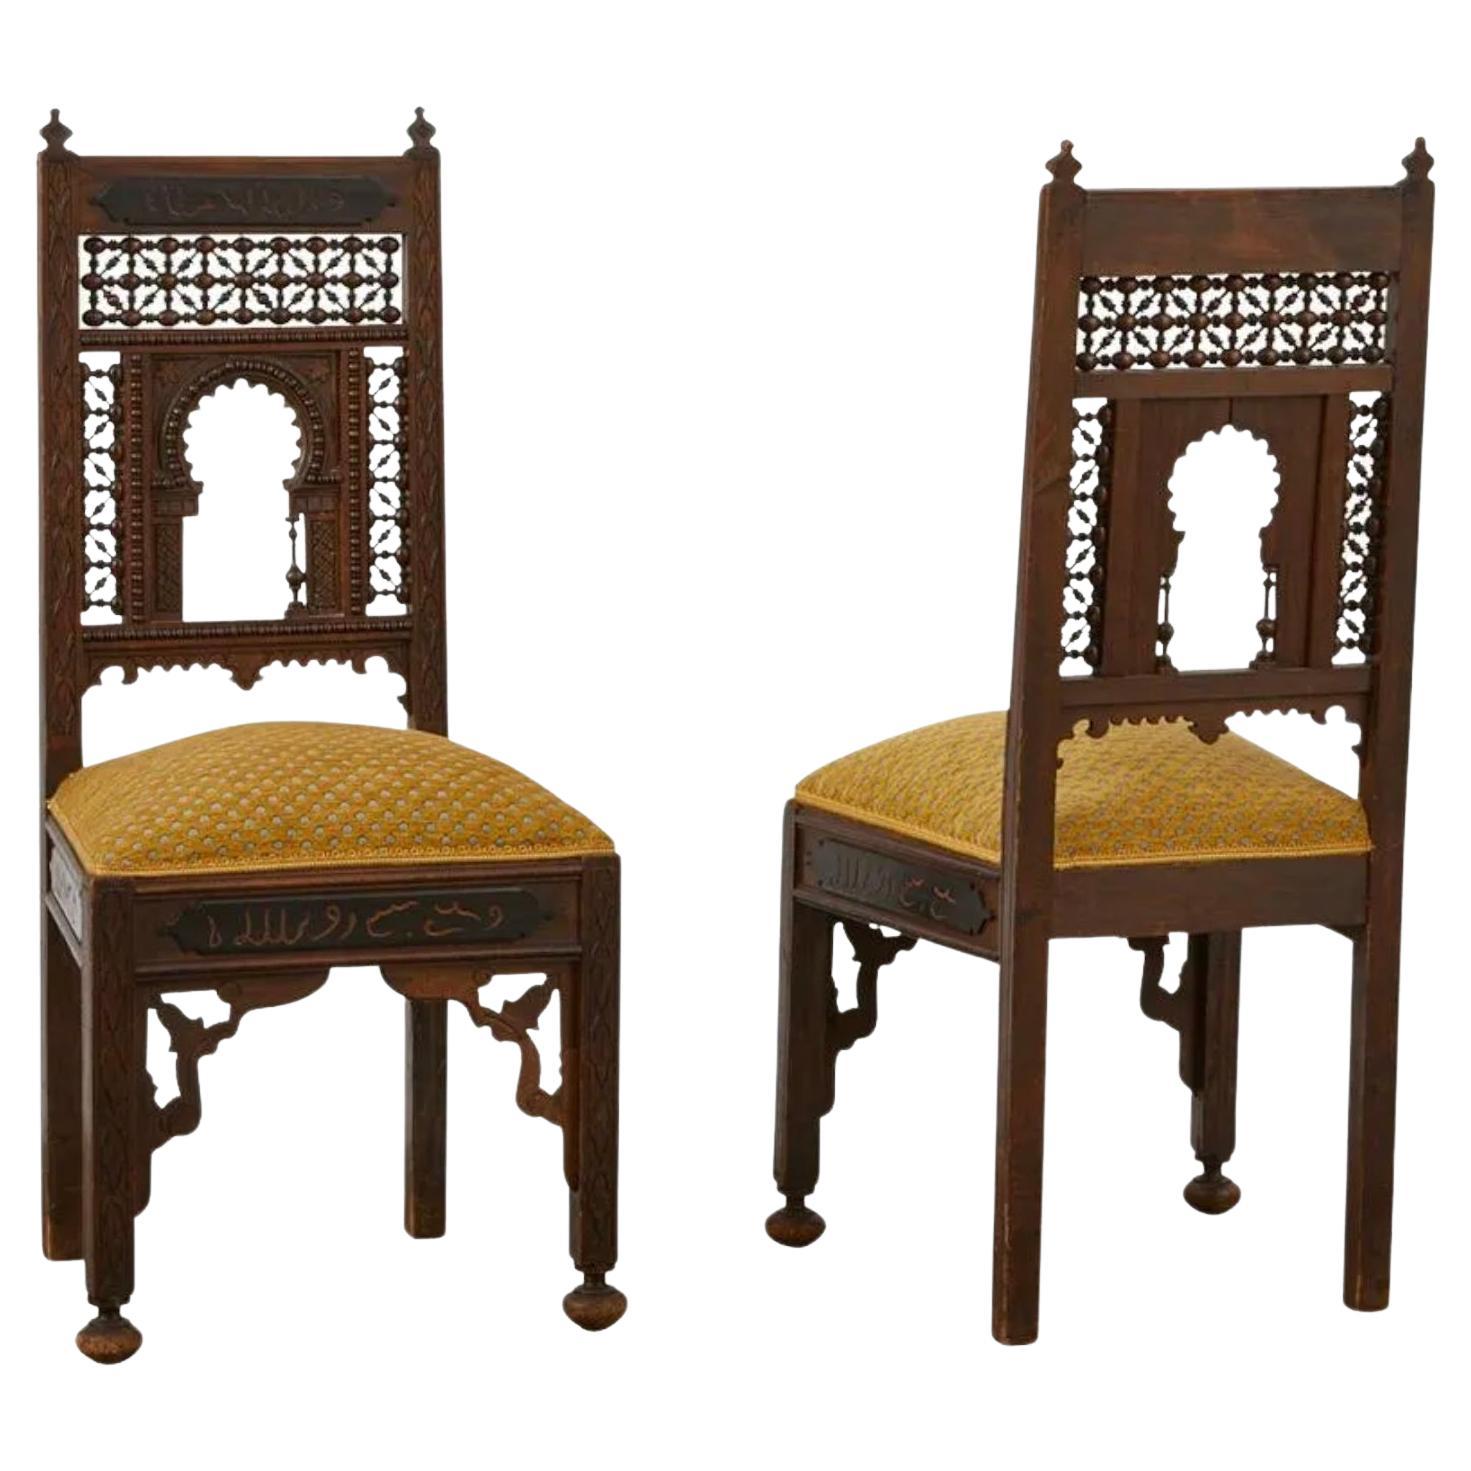 Pair of Syrian Carved Wooden Chairs